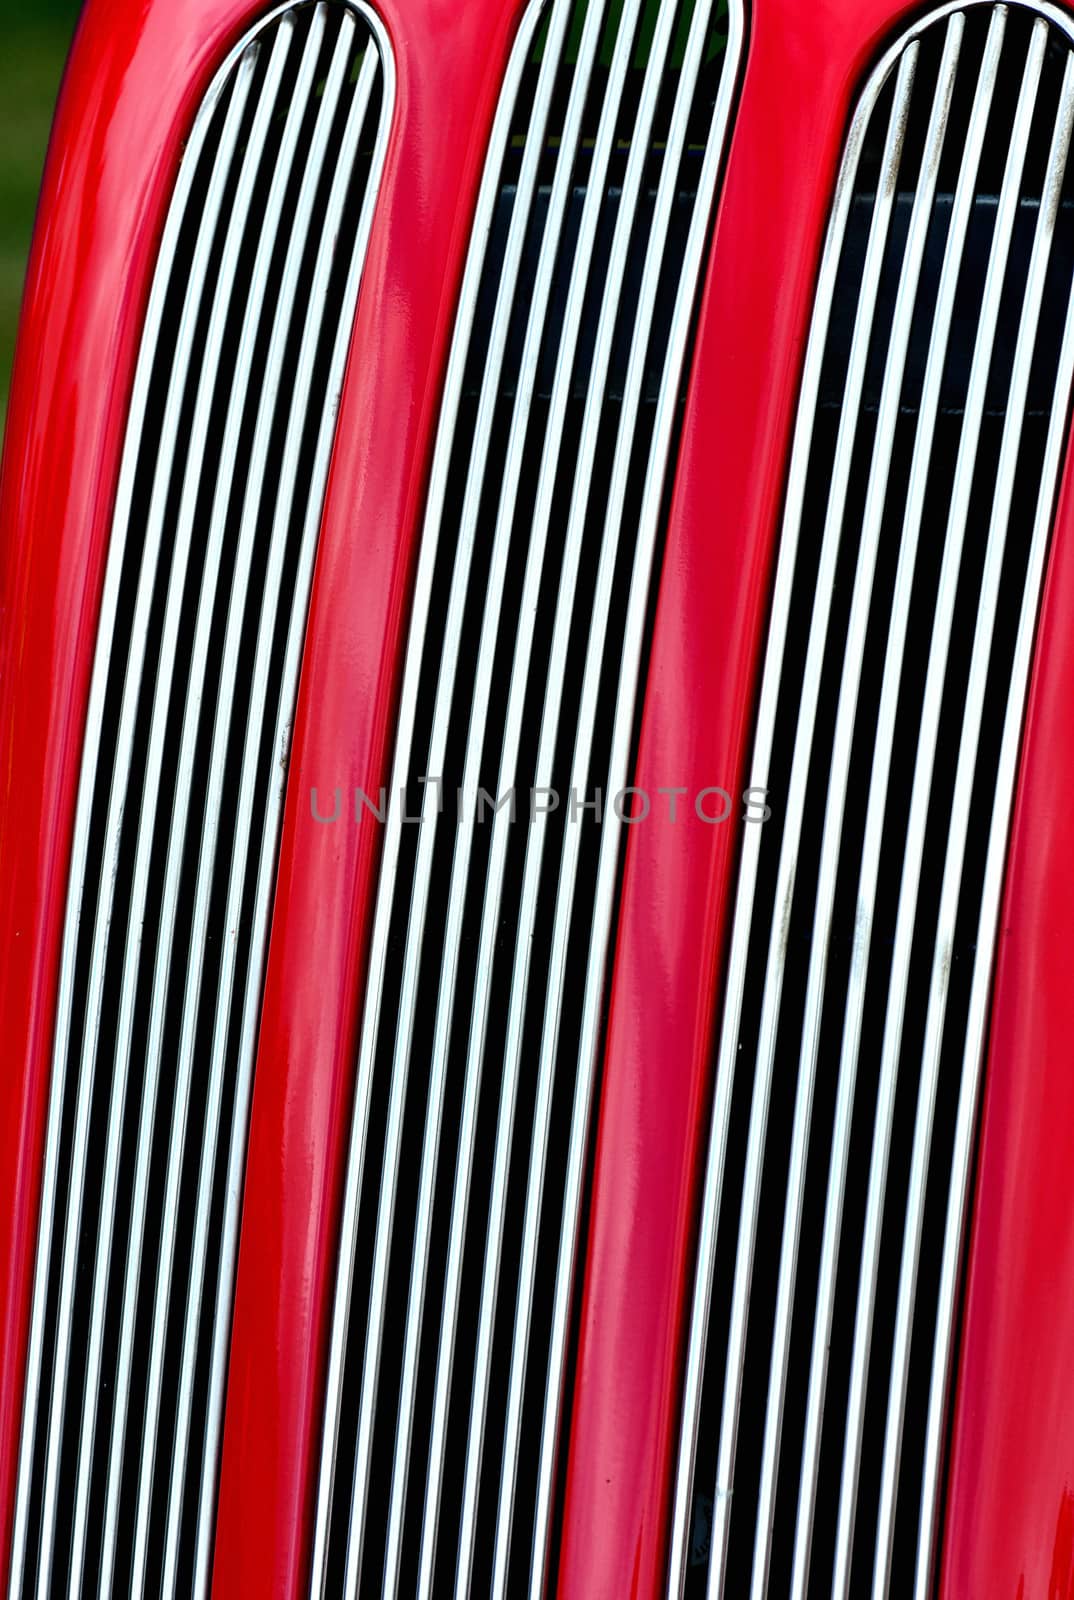 Red car radiator grill in portrait by pauws99